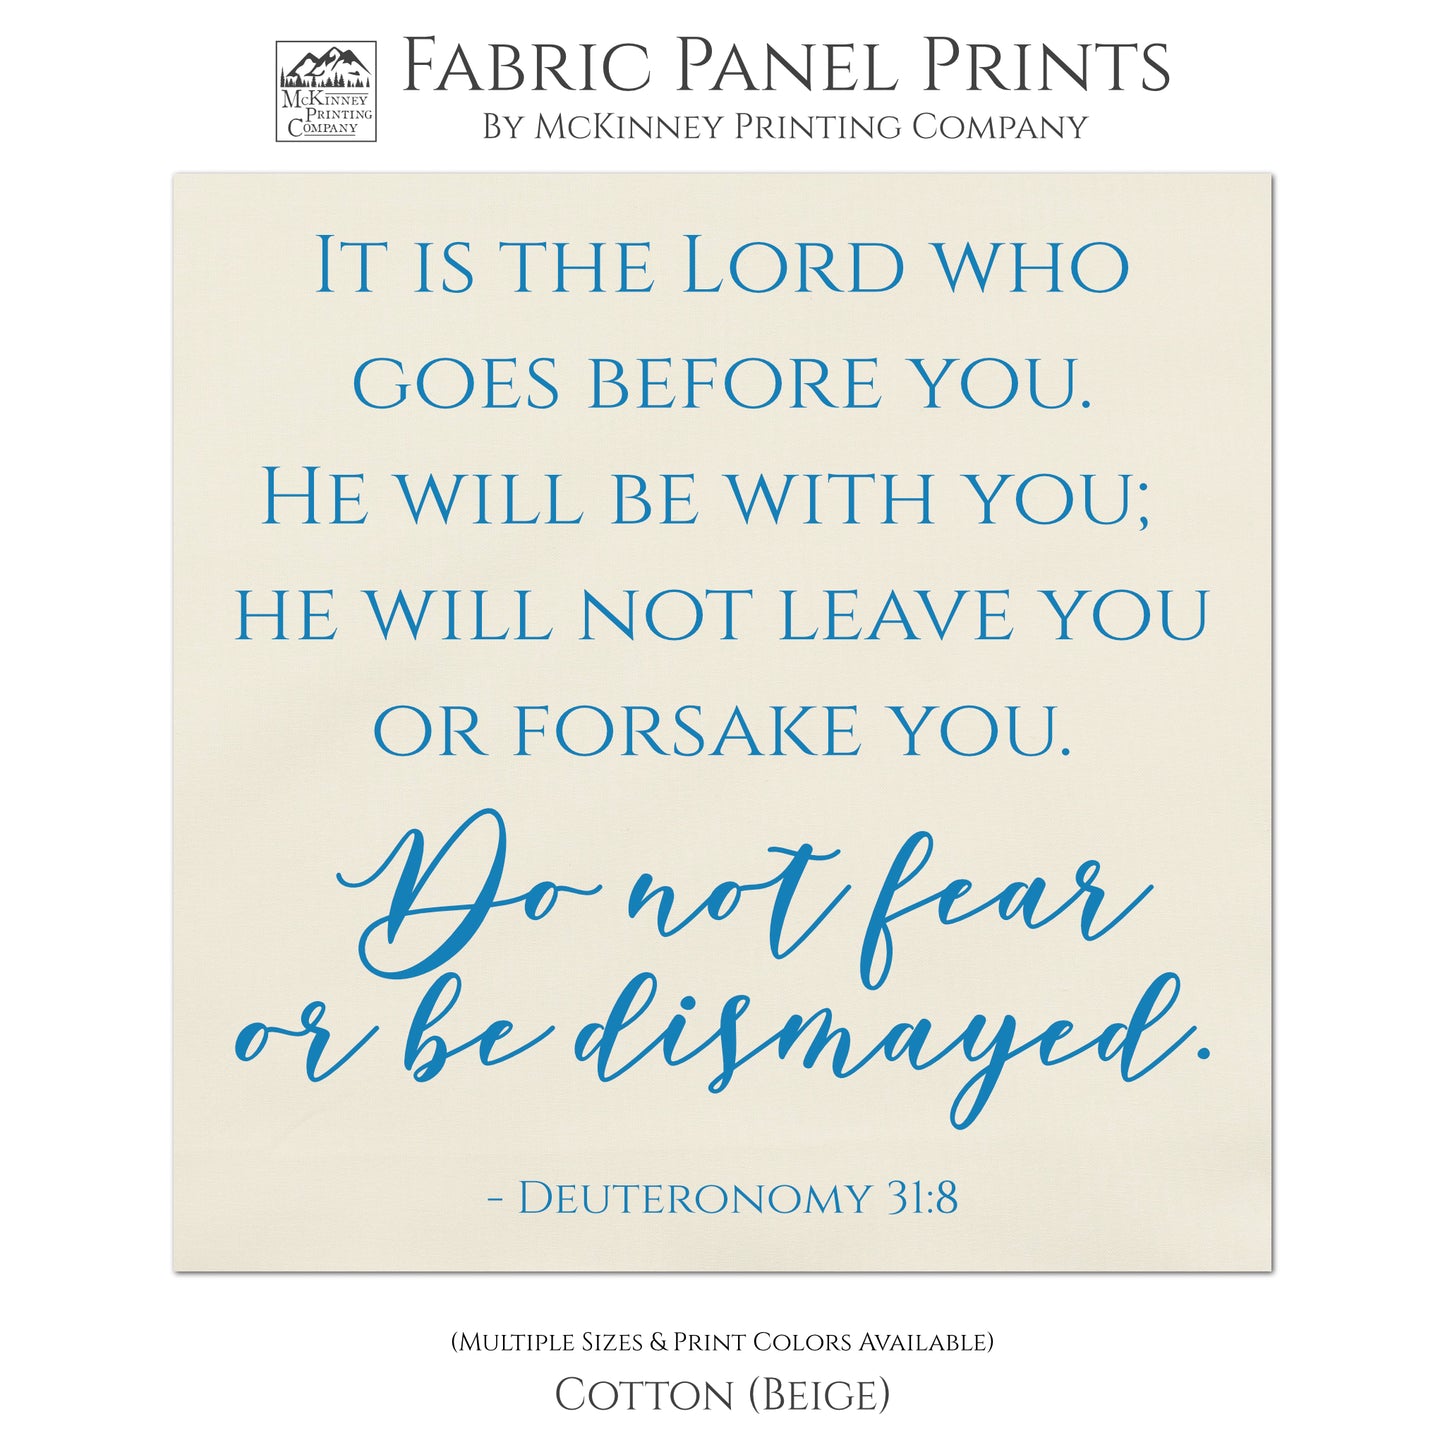 It is the Lord who goes before you. He will be with you; He will not leave you or forsake you. Do not fear or be dismayed. Deuteronomy 31:8 - Scripture Fabric Panel for Quilting and Crafting and Wall Art - Cotton